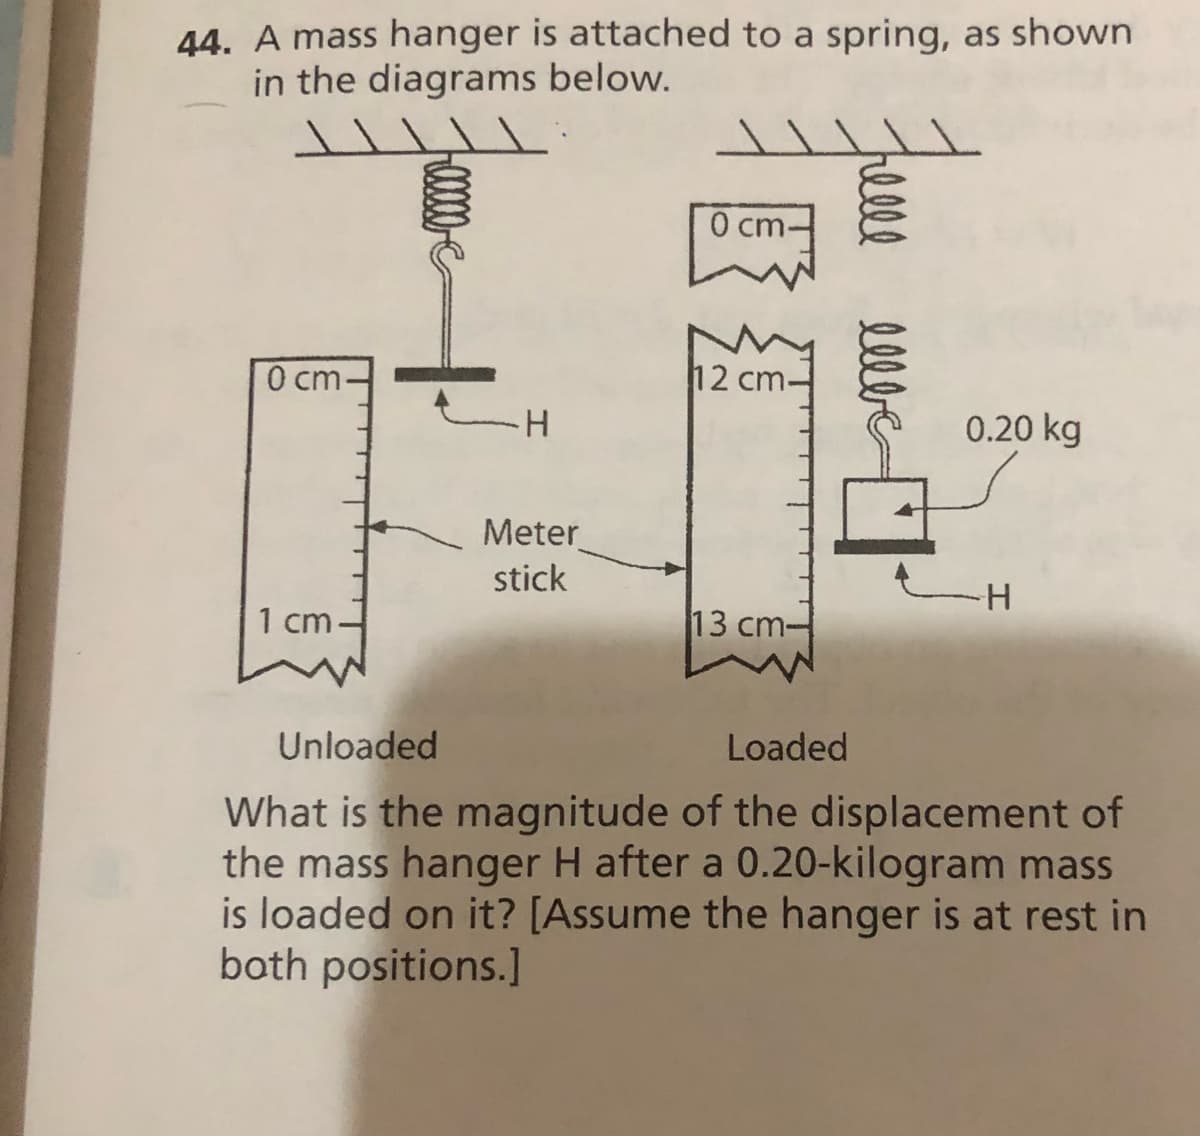 44. A mass hanger is attached to a spring, as shown
in the diagrams below.
0 cm-
0 cm-
12 cm.
H.
0.20 kg
Meter
stick
1 cm-
13 cm-
Unloaded
Loaded
What is the magnitude of the displacement of
the mass hanger H after a 0.20-kilogram mass
is loaded on it? [Assume the hanger is at rest in
both positions.]
rel
elbe
